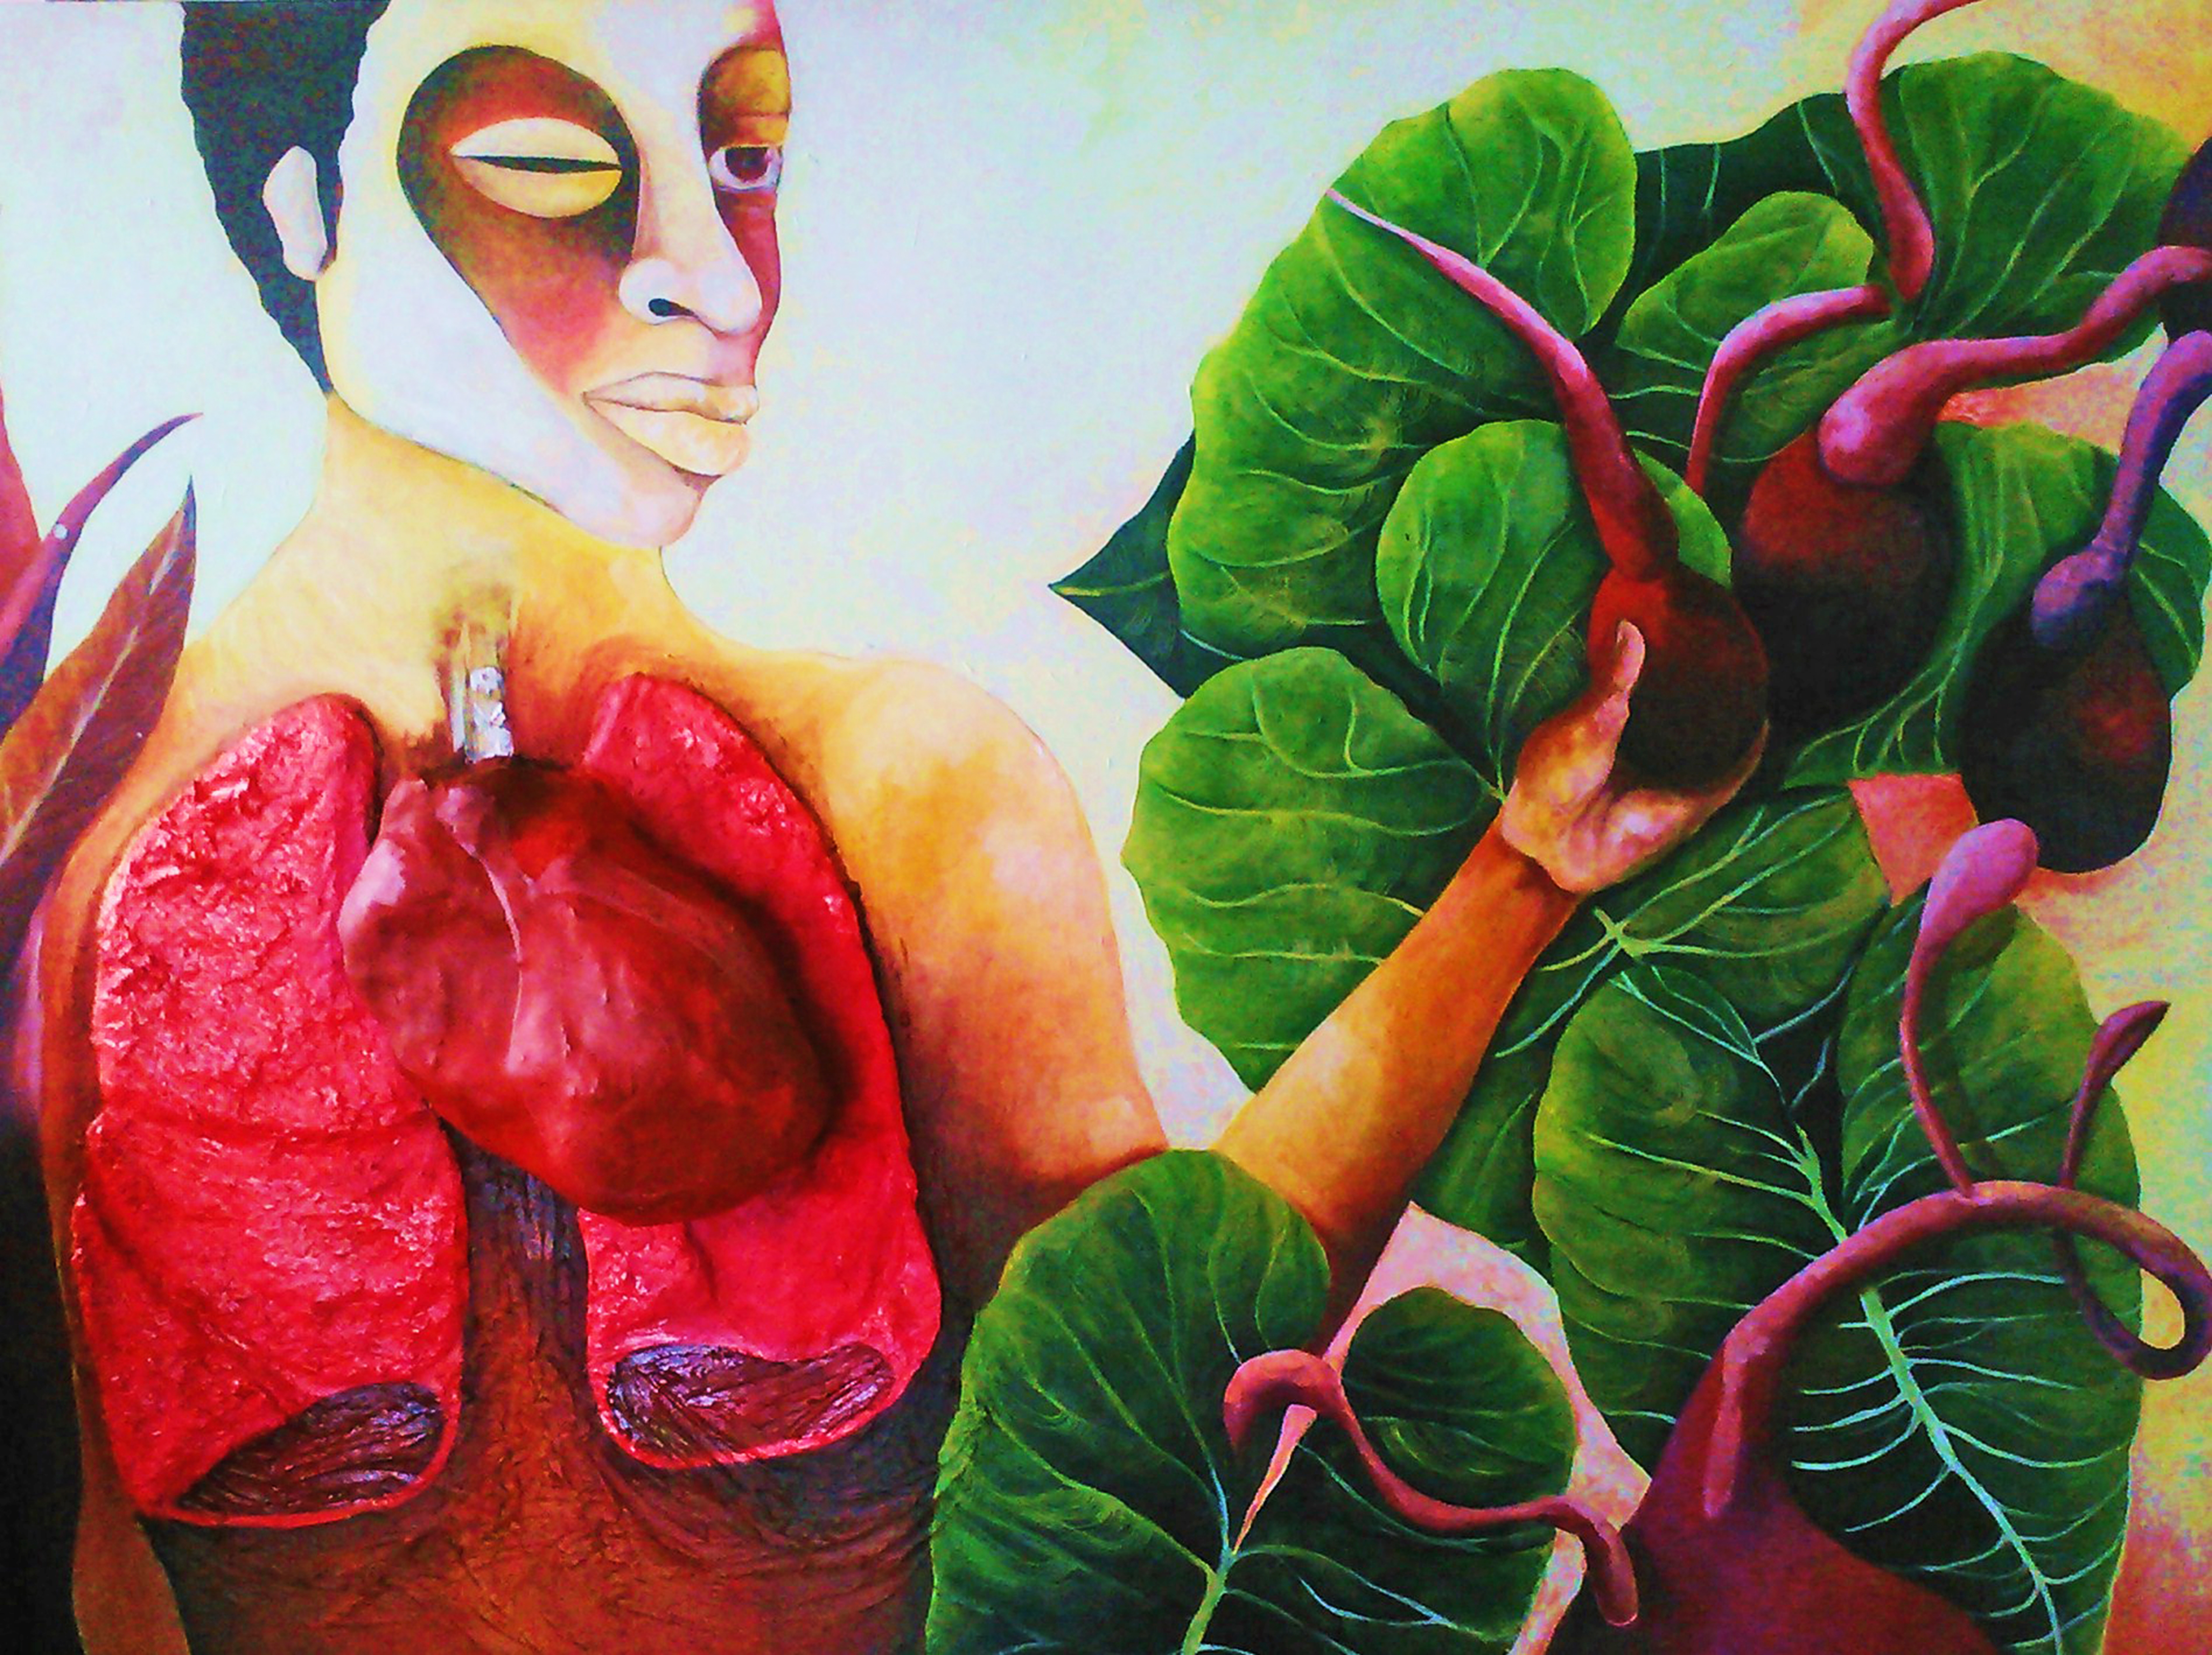 An painting depicting a person with visible lungs and heart holding a beet-like vegetable surrounded by large green leaves